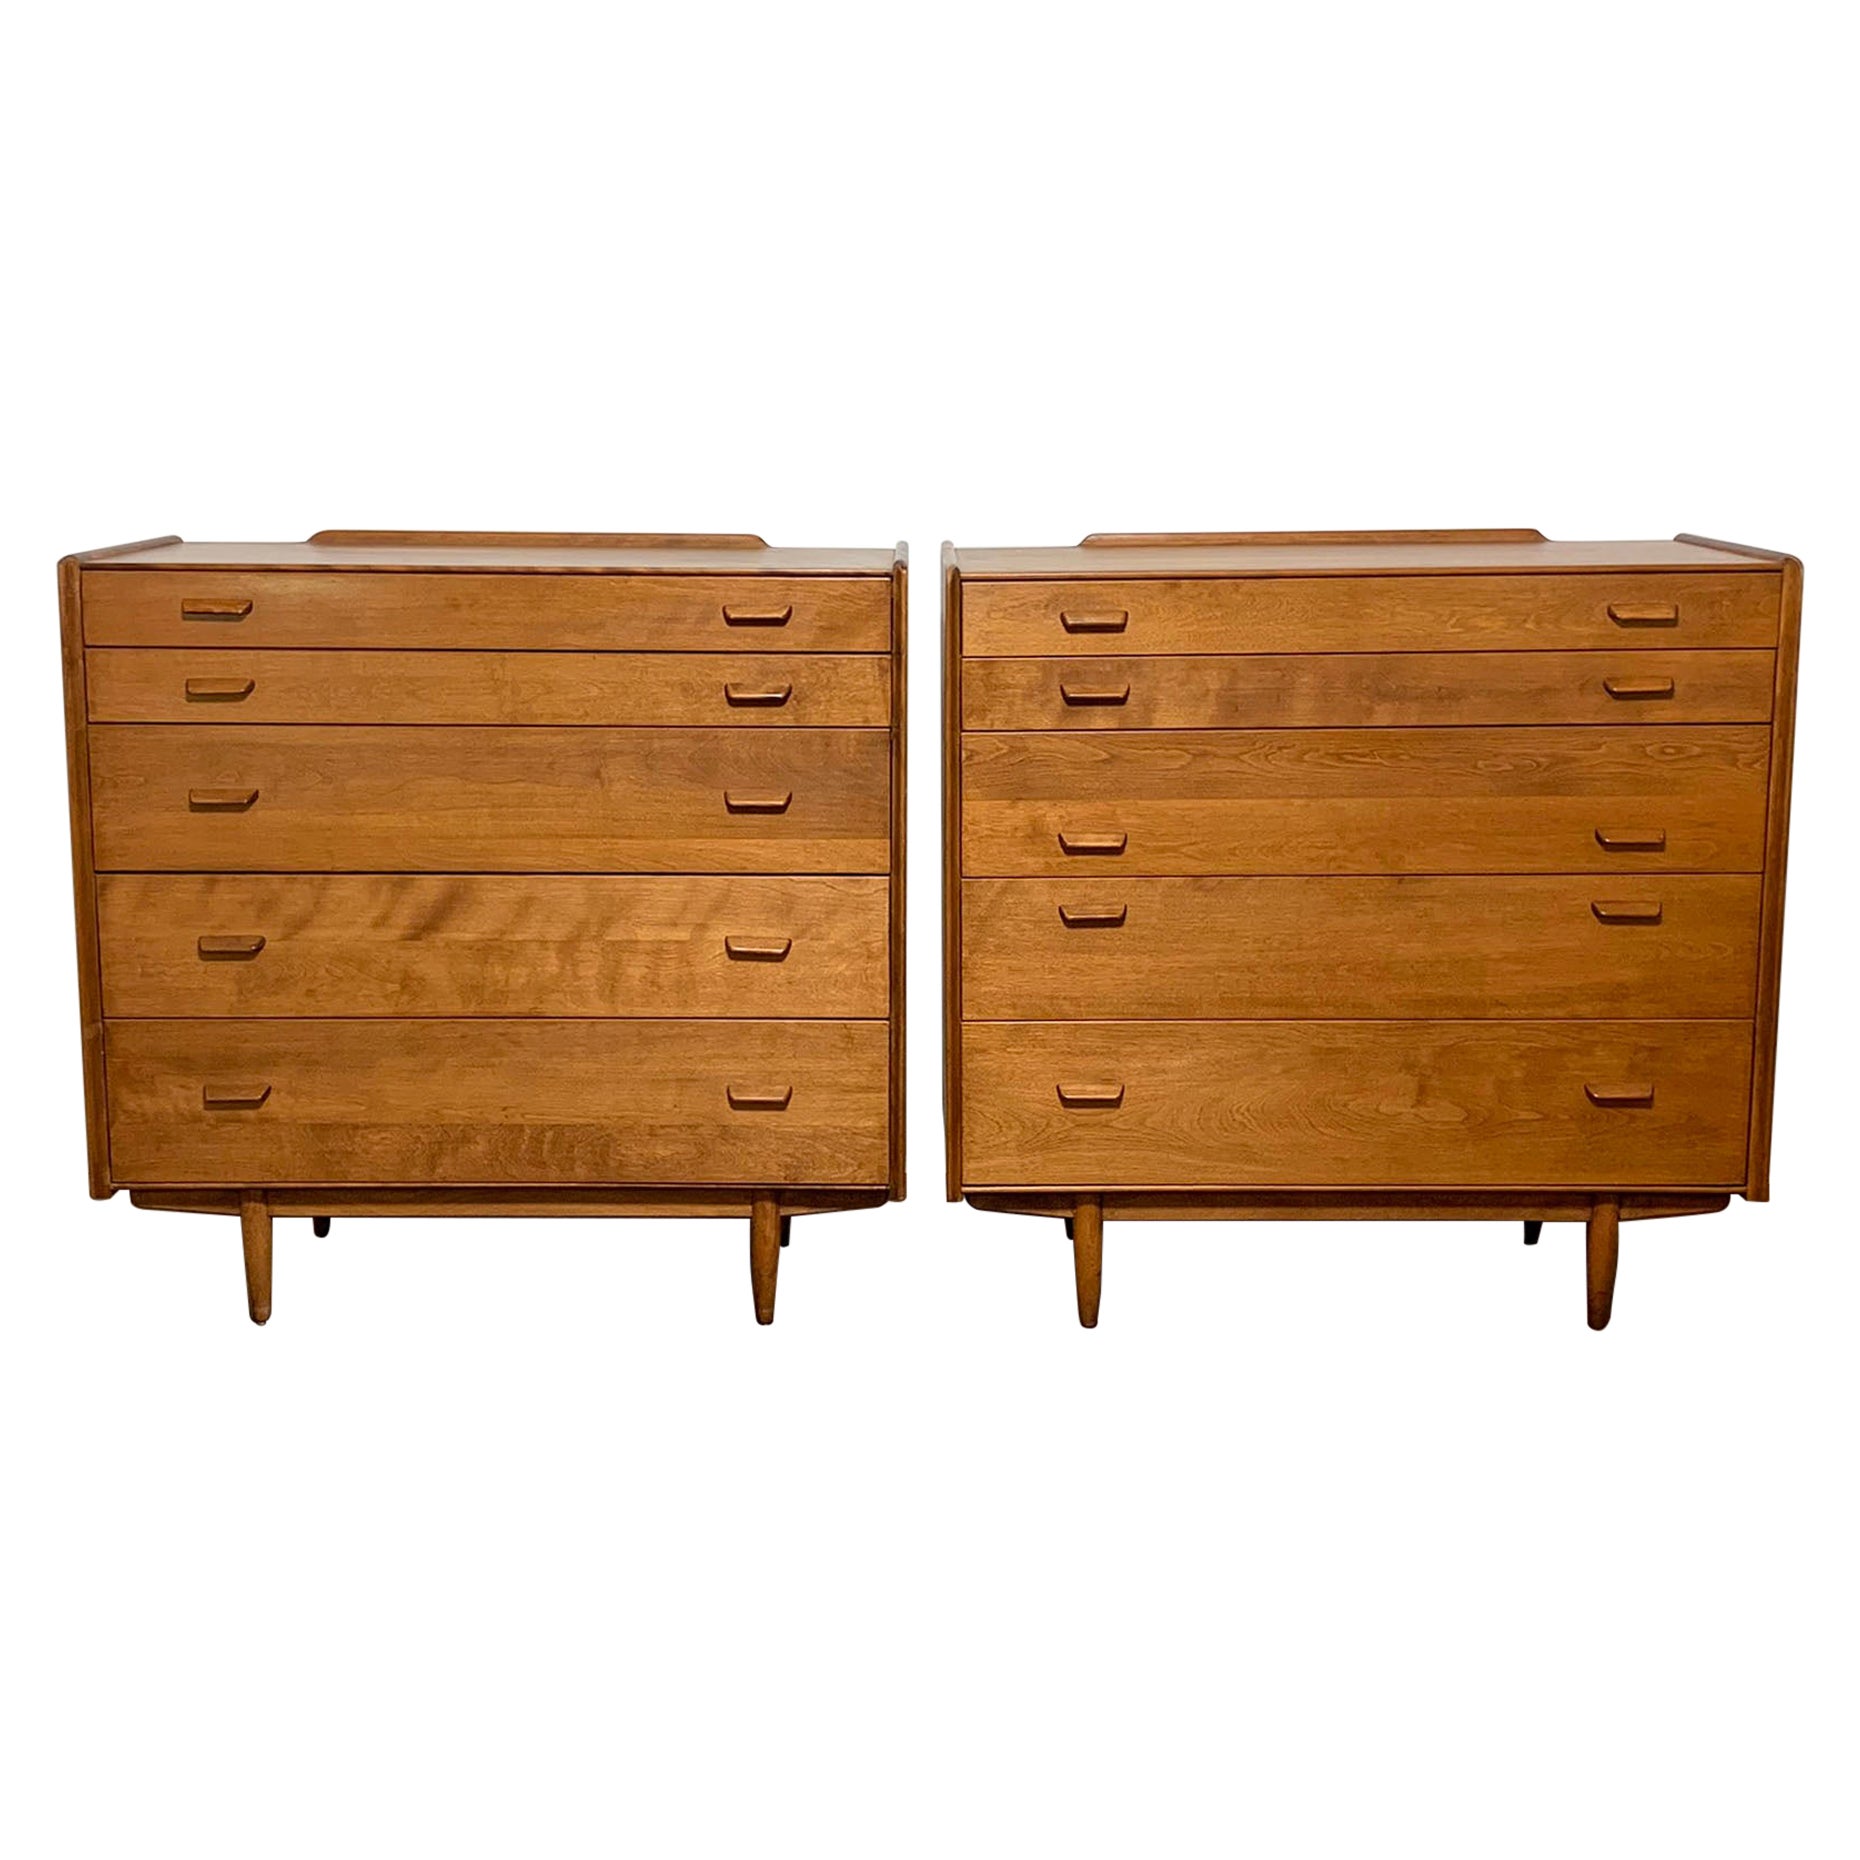 Pair of Russel Wright for Conant Ball Five Drawer Dressers Circa 1950s